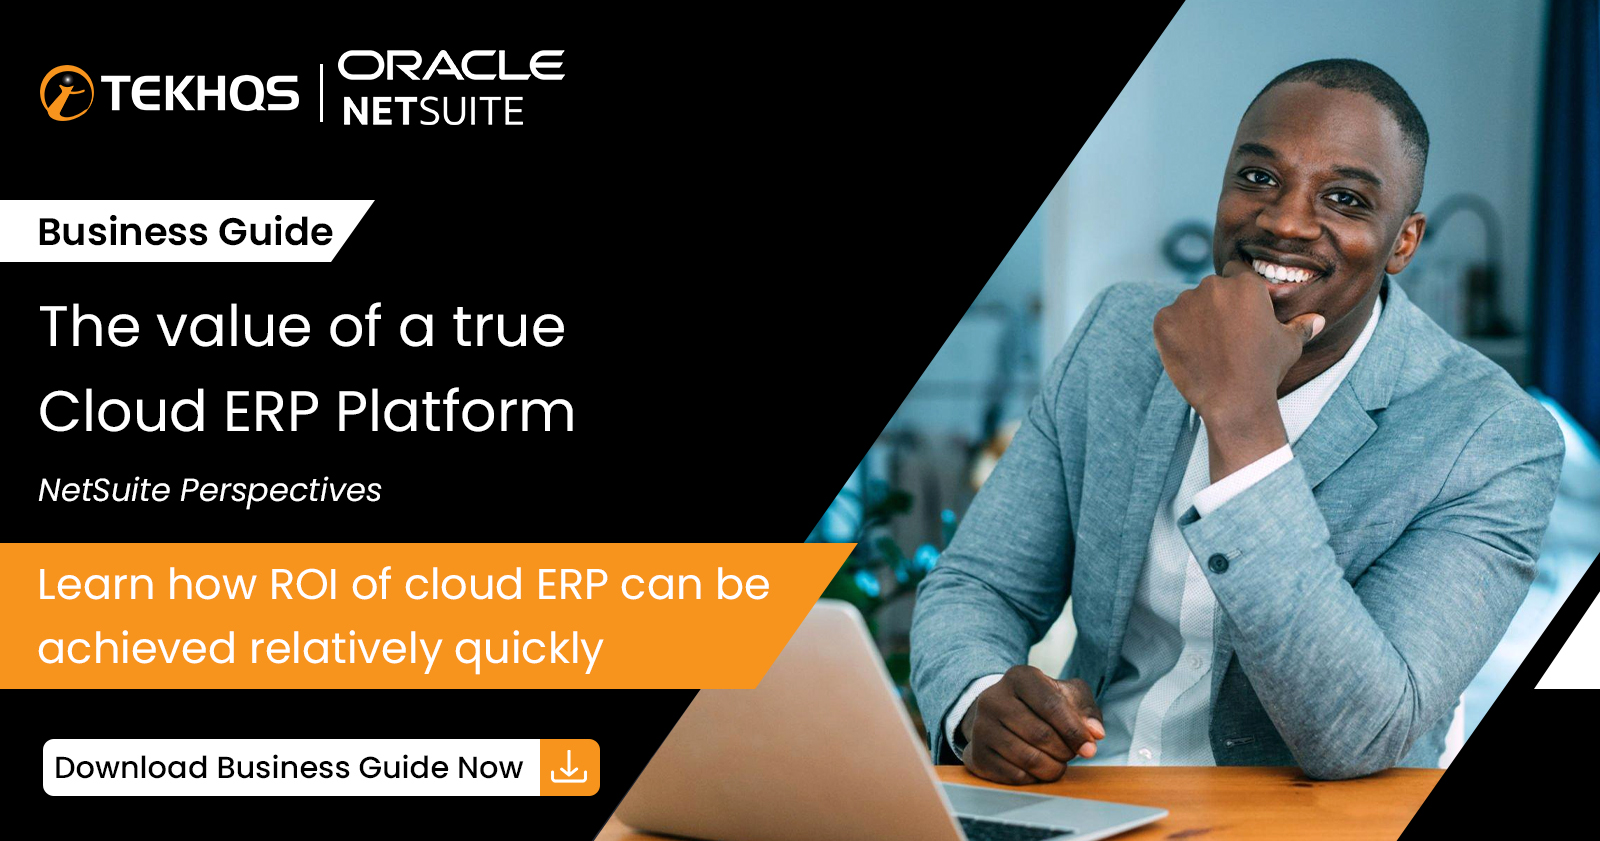 Find out the value of a True Cloud ERP